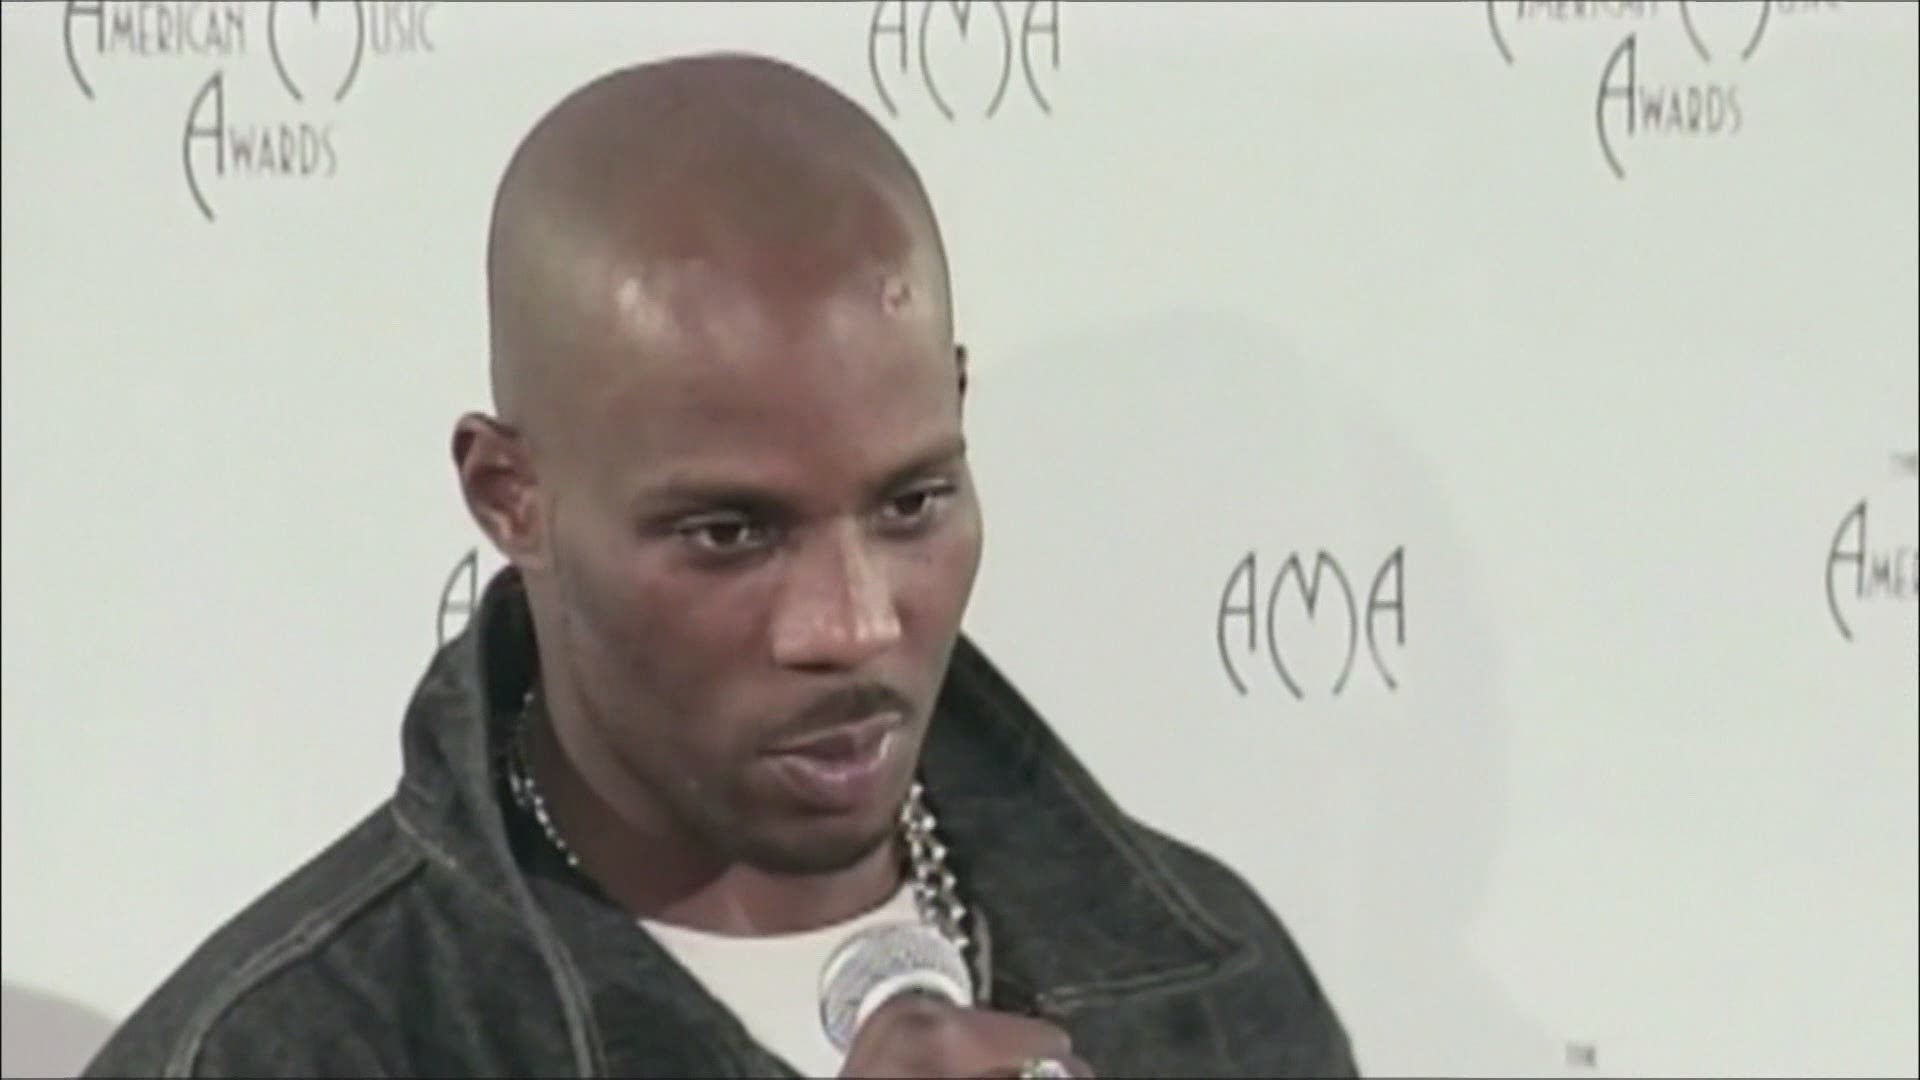 DMX made his mark as one of hip-hop’s most recognizable names for his rap artistry and as an actor.